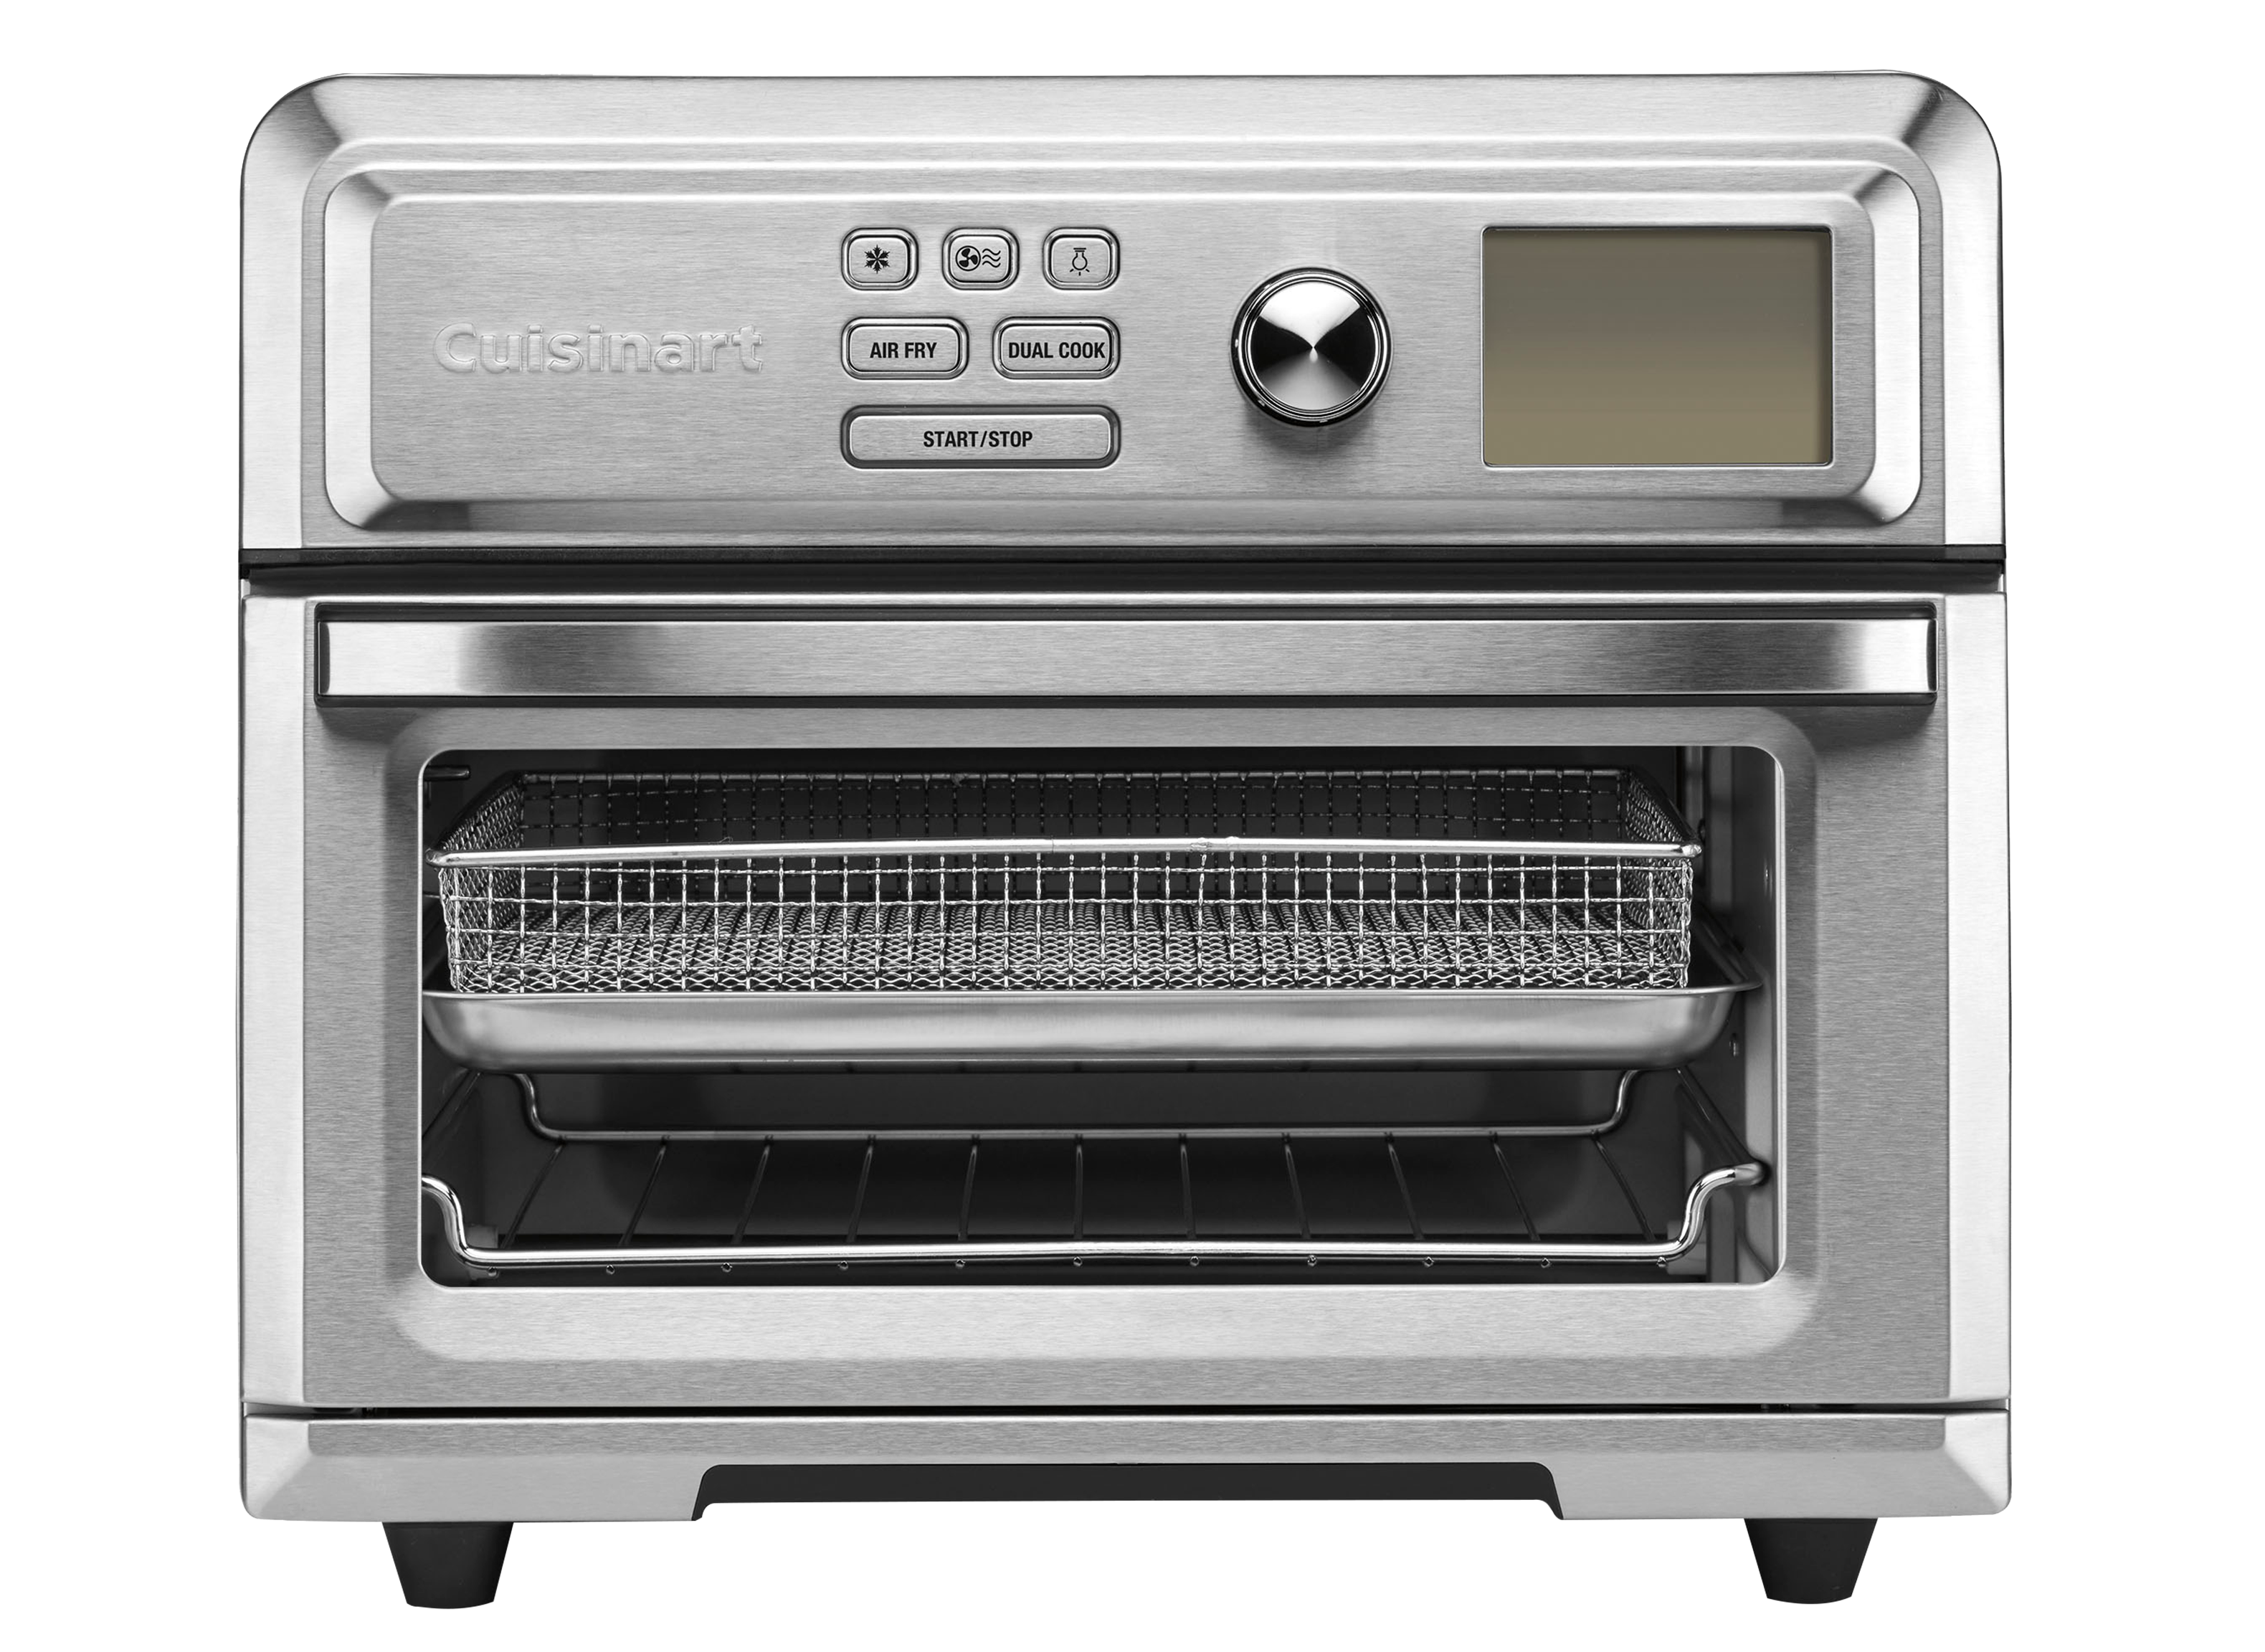 Best Toaster Ovens From Consumer Reports' Tests